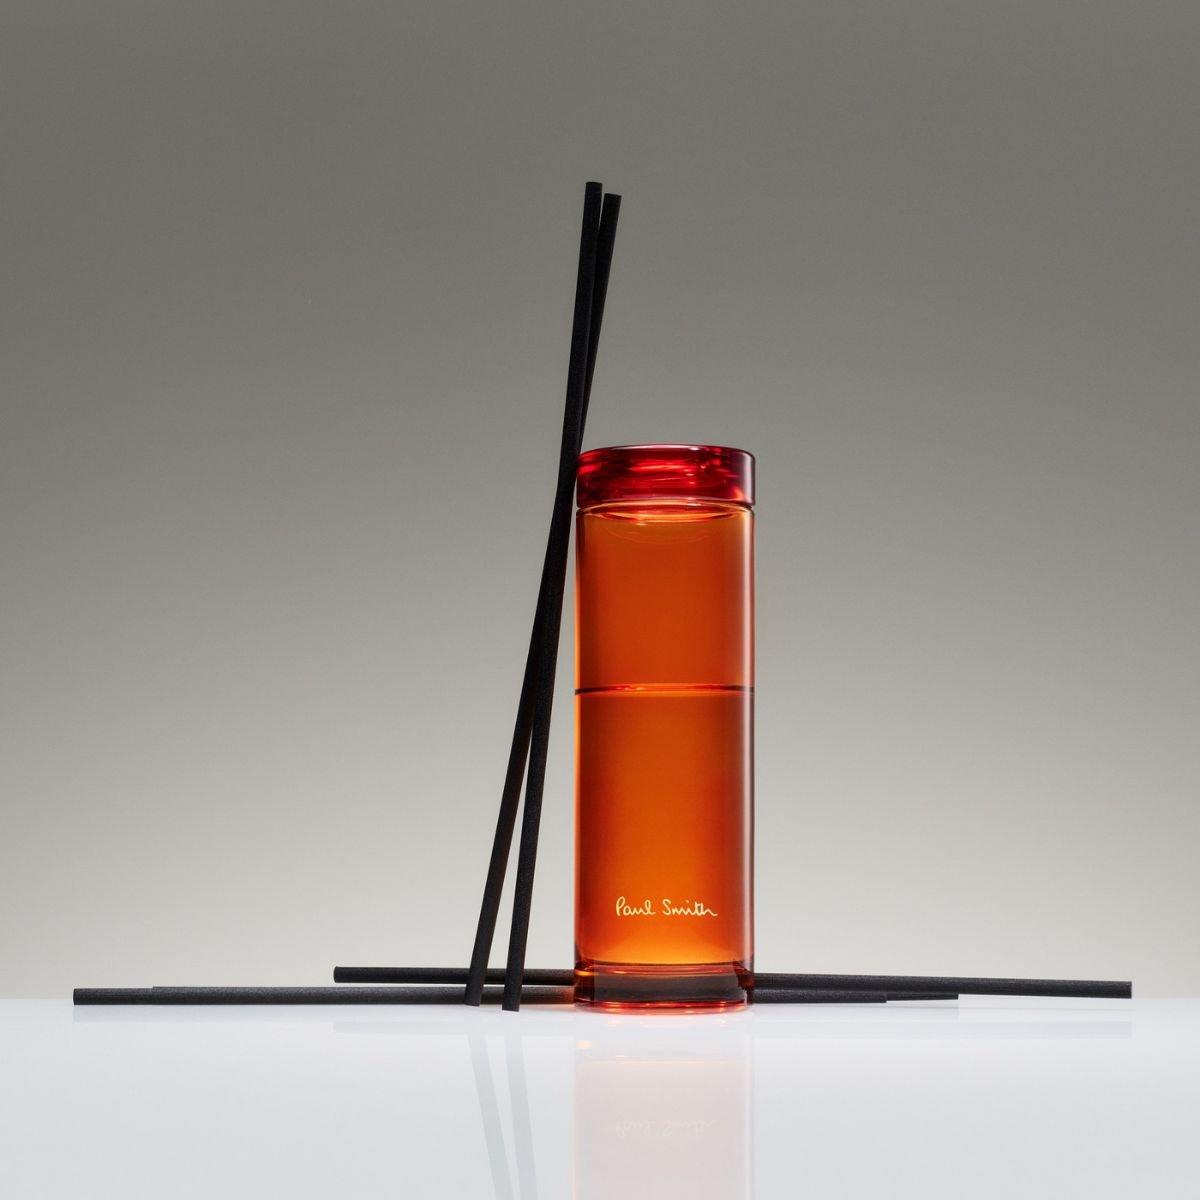 Image of Bookworm reed diffuser by the brand Paul Smith